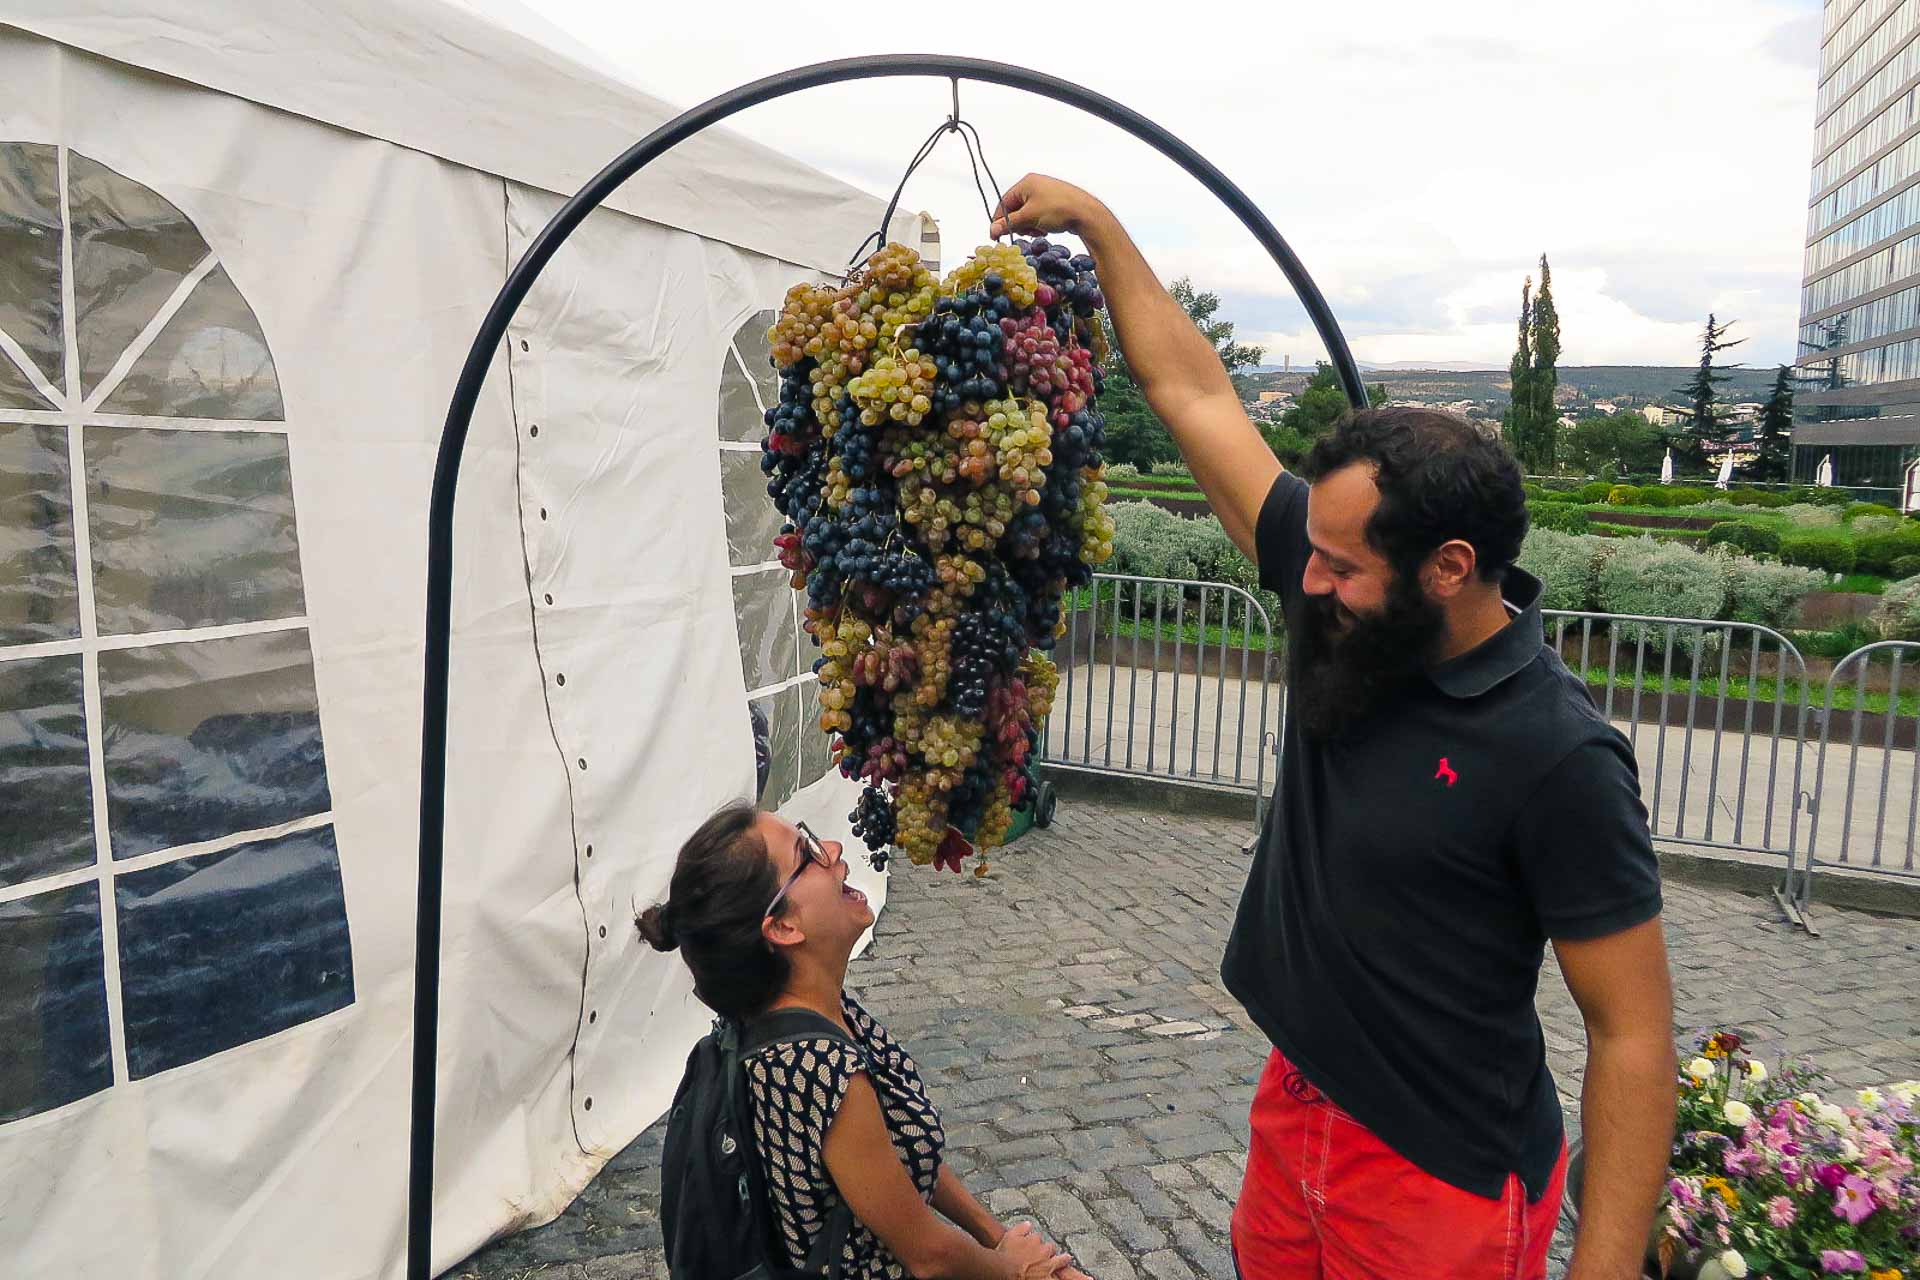 Tiago holding a massive grape bunch and Fernanda ready to eat some